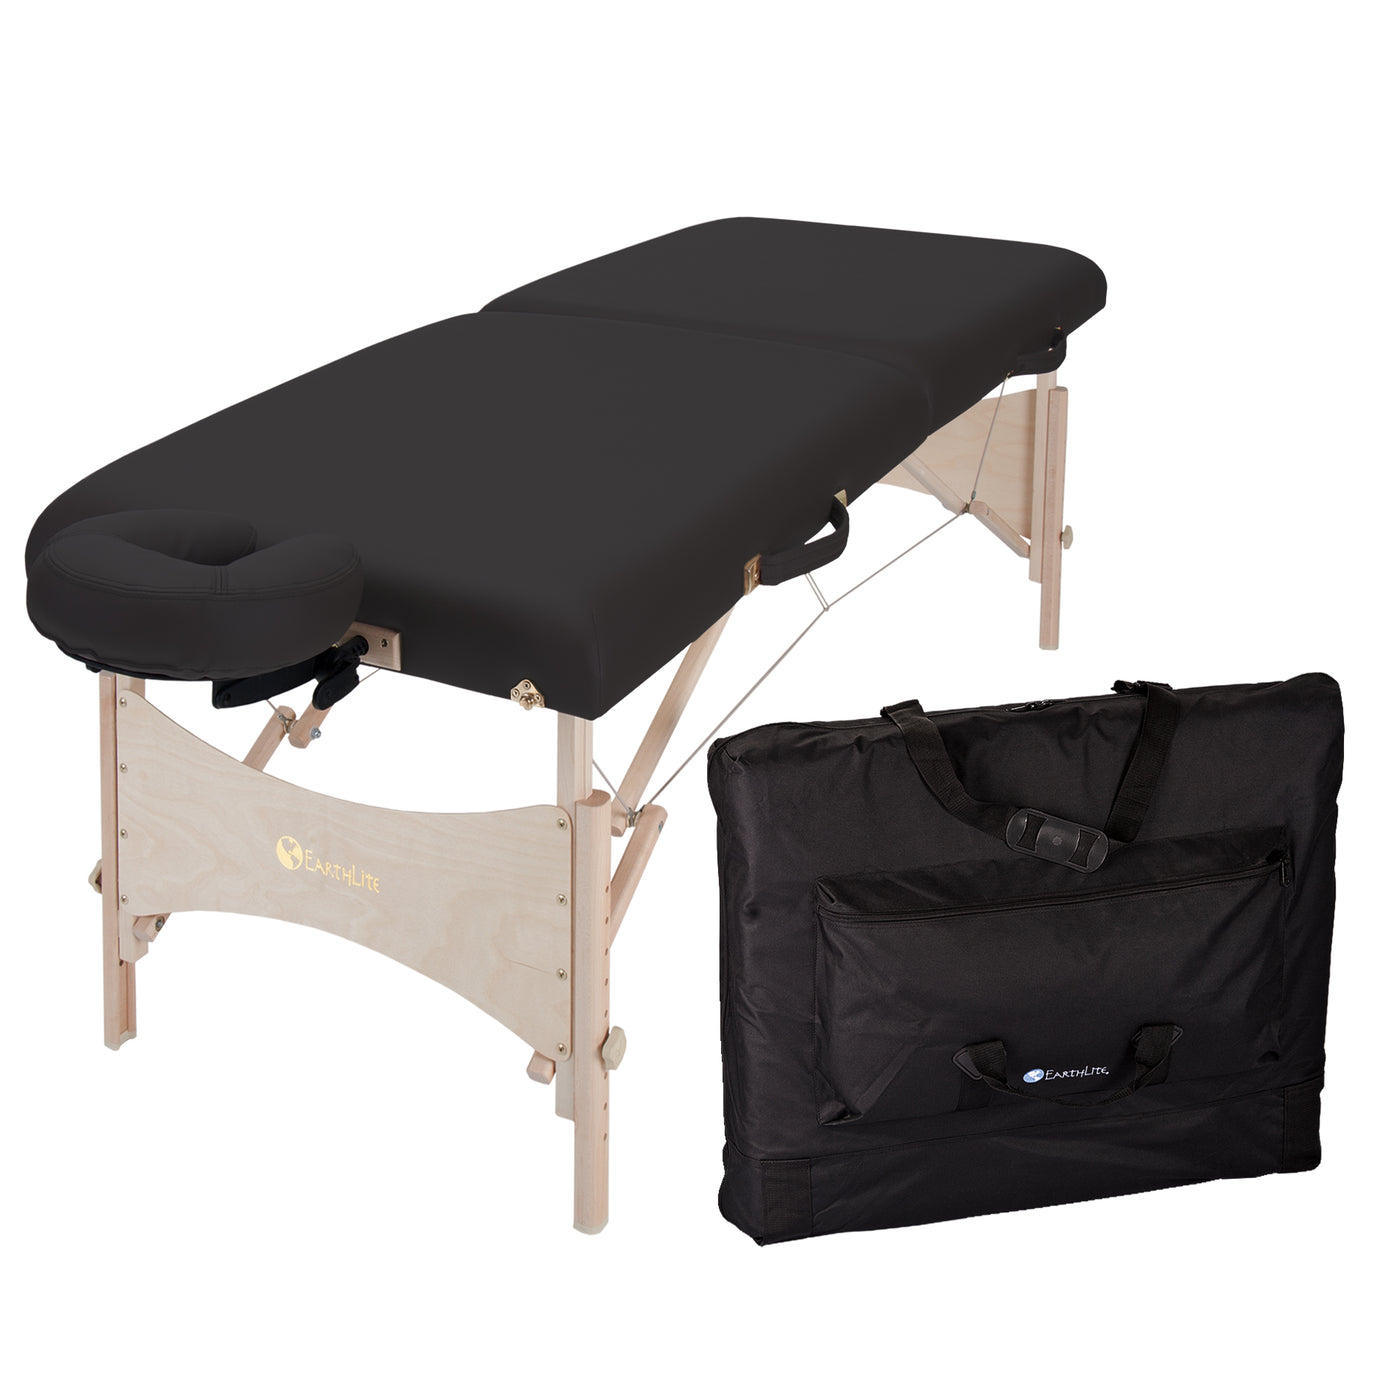 Portable Starter Massage Table Packages